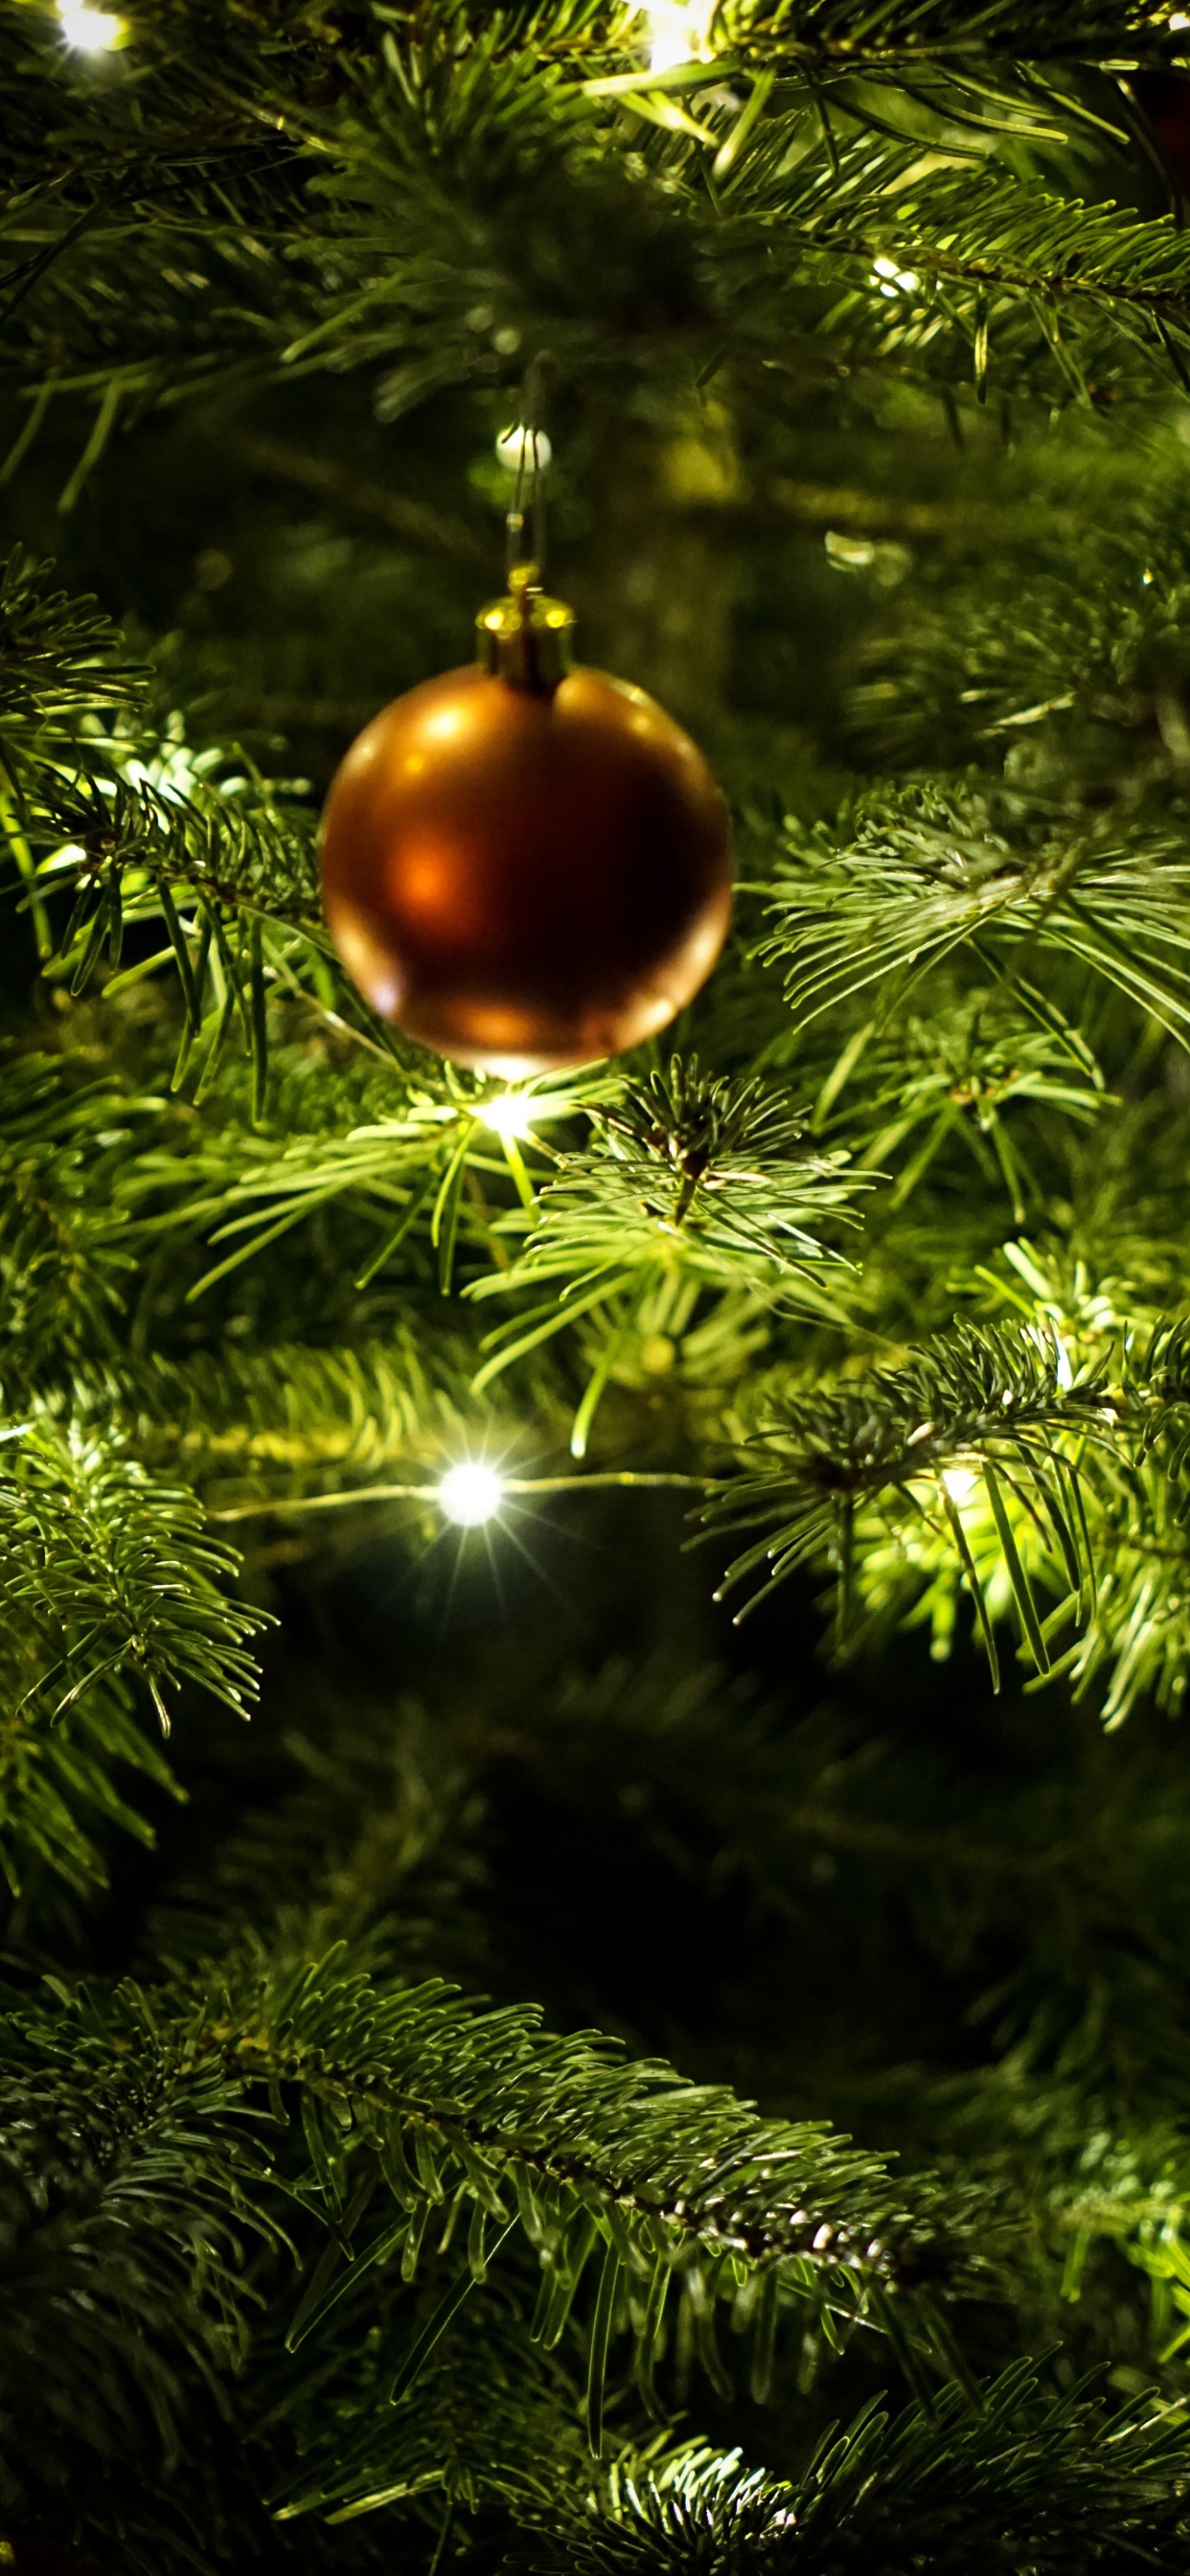 New Year, Christmas Day, Christmas Ornament, Christmas Decoration, Christmas Tree. Wallpaper in 1242x2688 Resolution